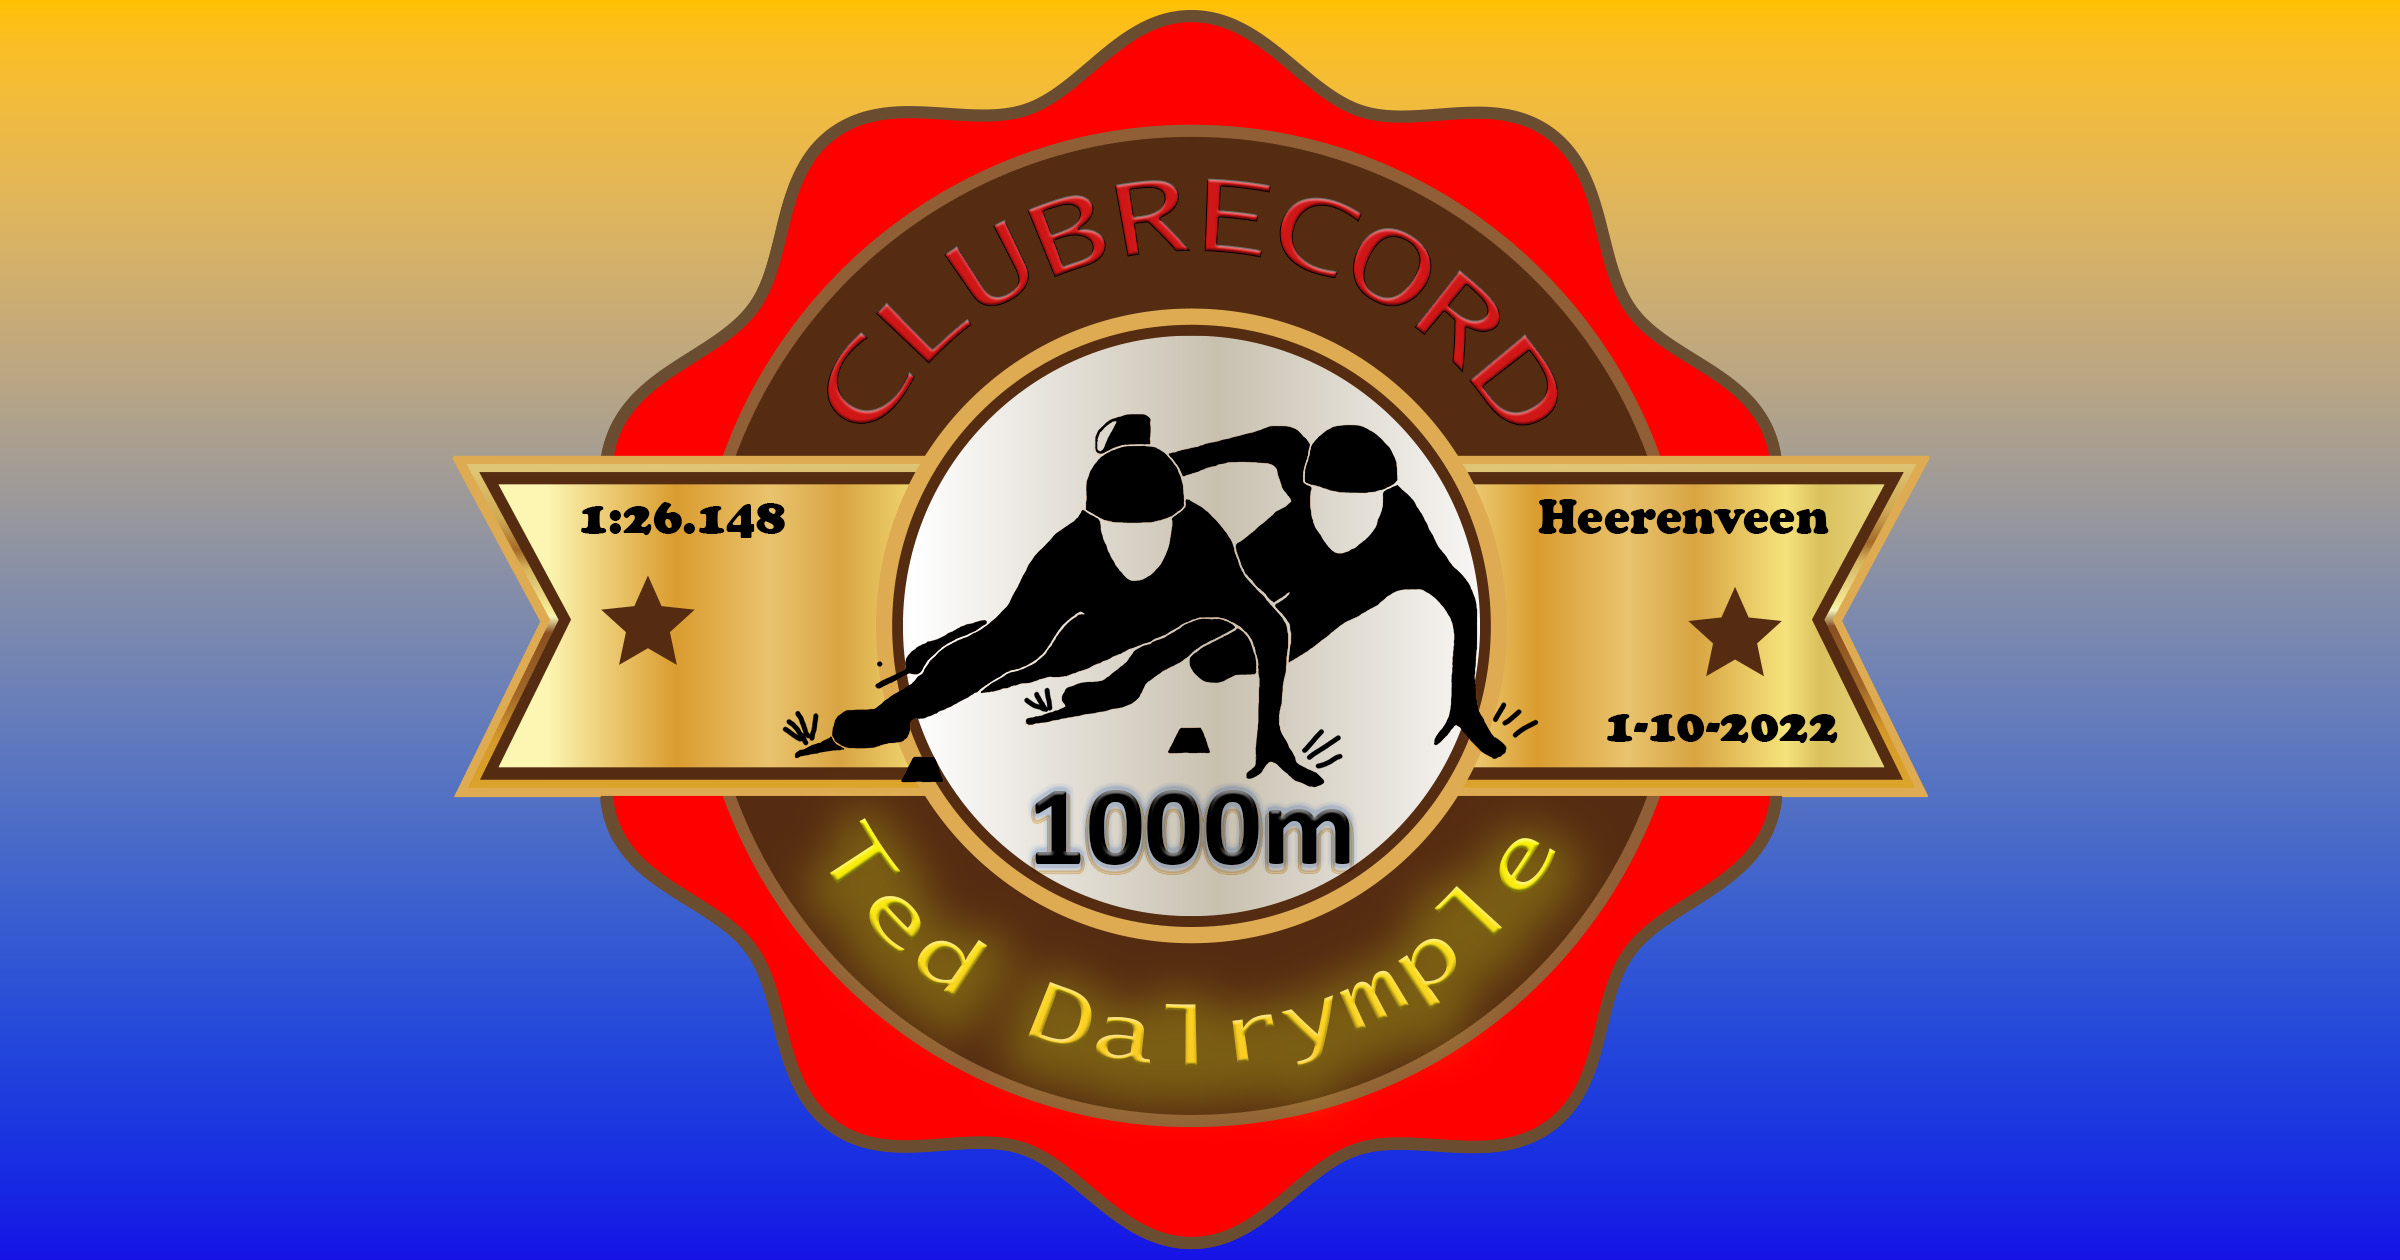 clubrecord 1000m Ted Dalrymple